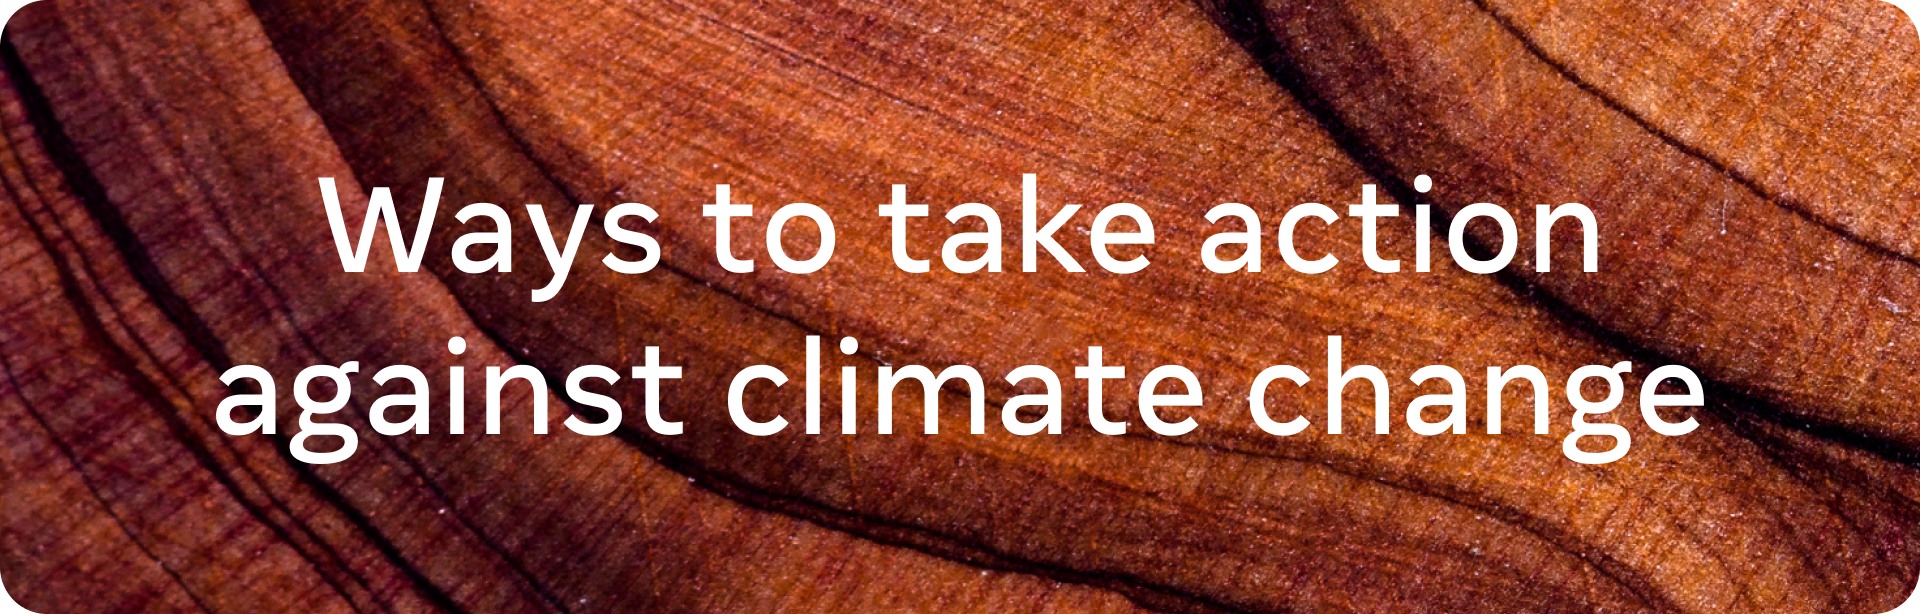 Ways to Take Action Against Climate Change graphic